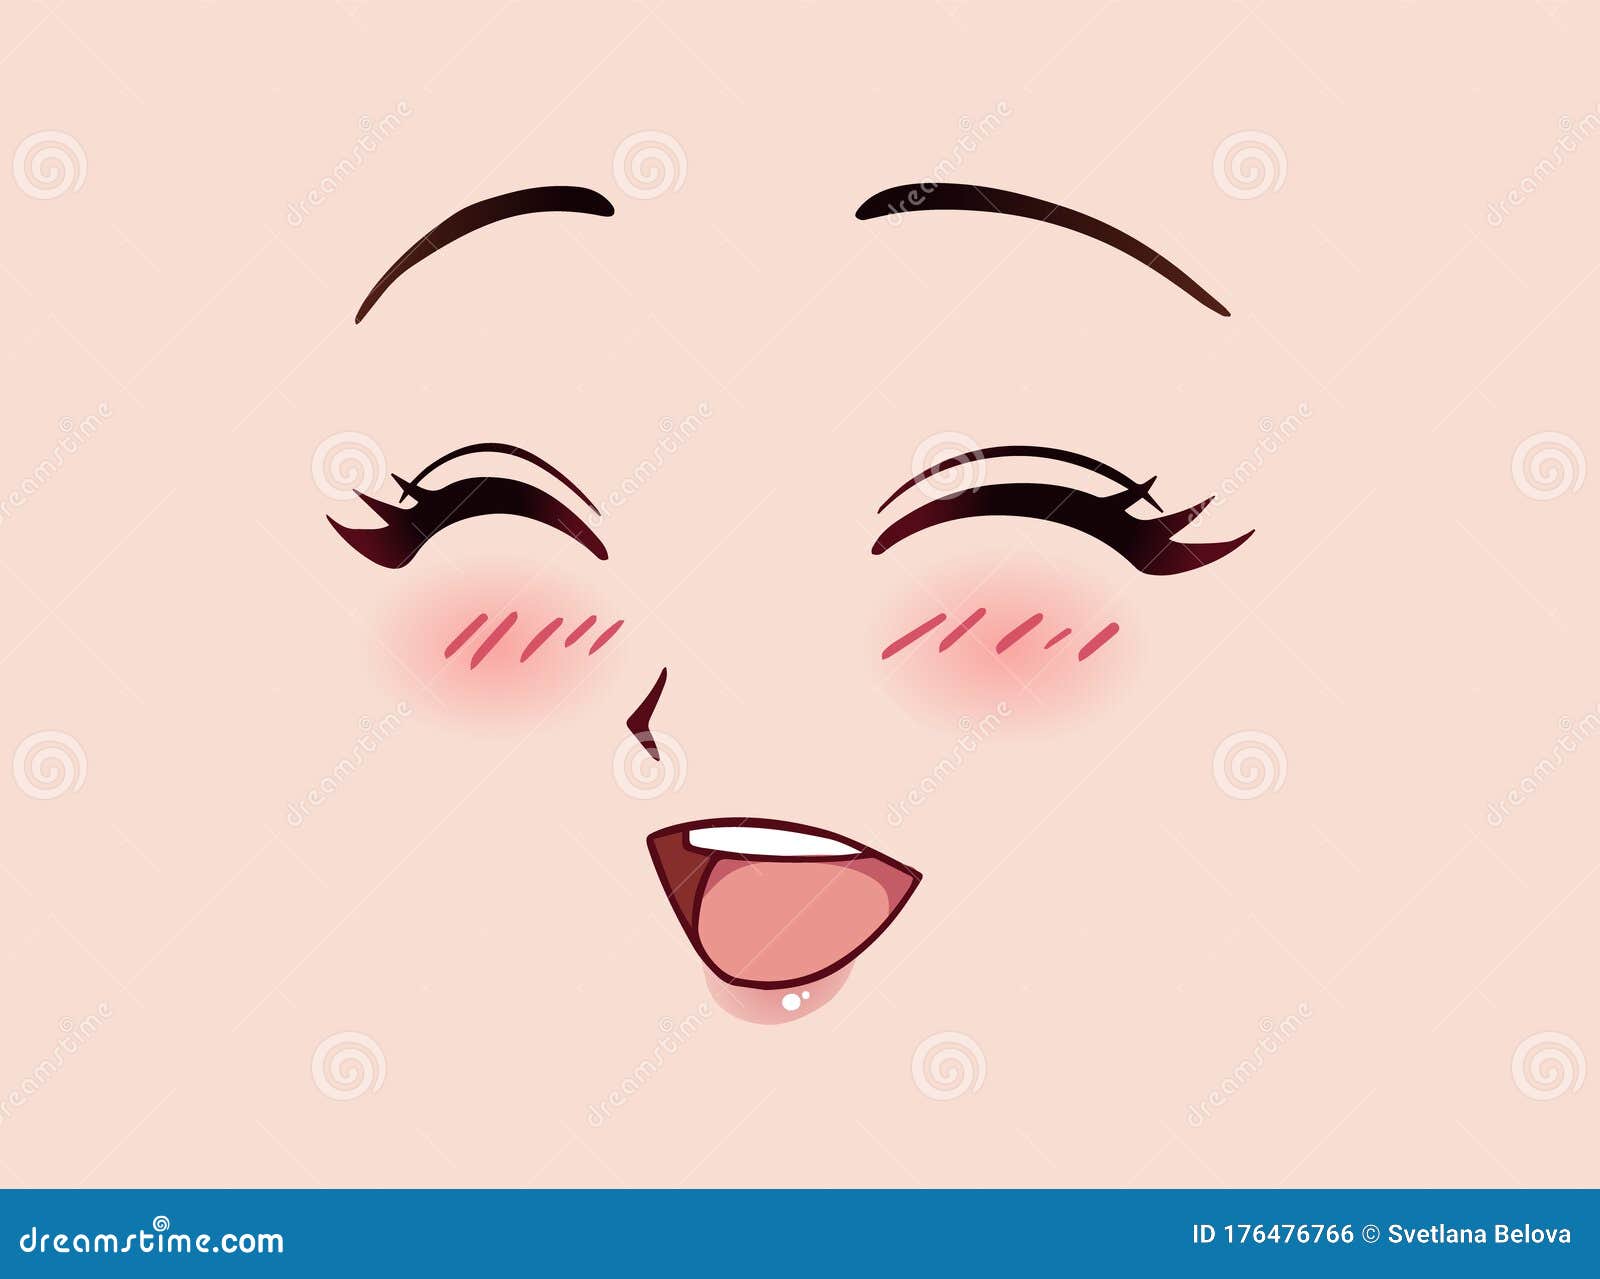 Happy Anime Face. Manga Style Closed Eyes, Little Nose and Kawaii Mouth  Stock Vector - Illustration of female, drawing: 176476766